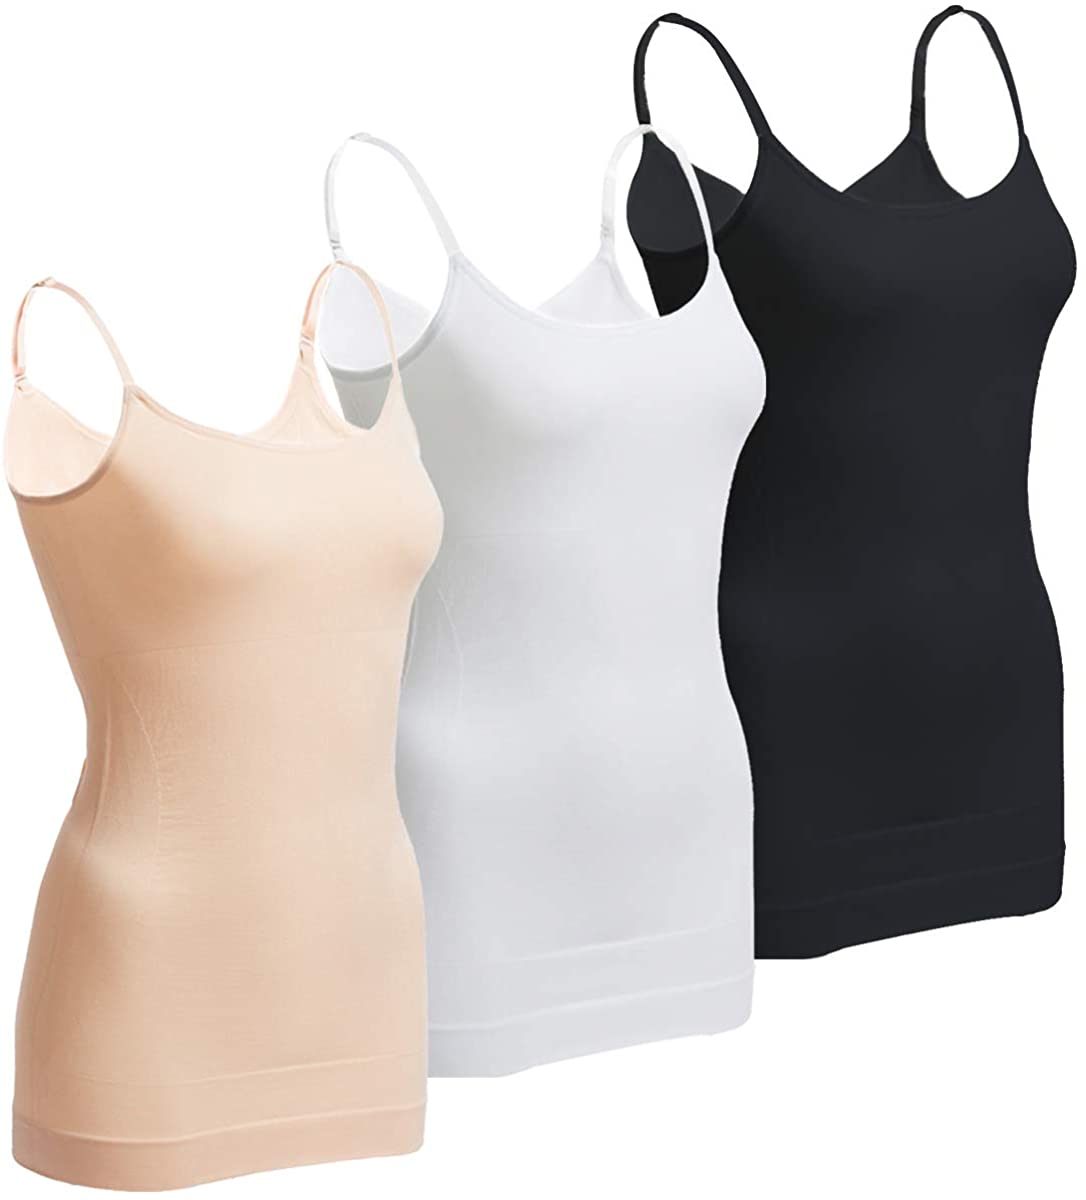 Women Slimming Tank top with Firm Tummy Control Shapewear Camisole Seamless Shaping Tops 